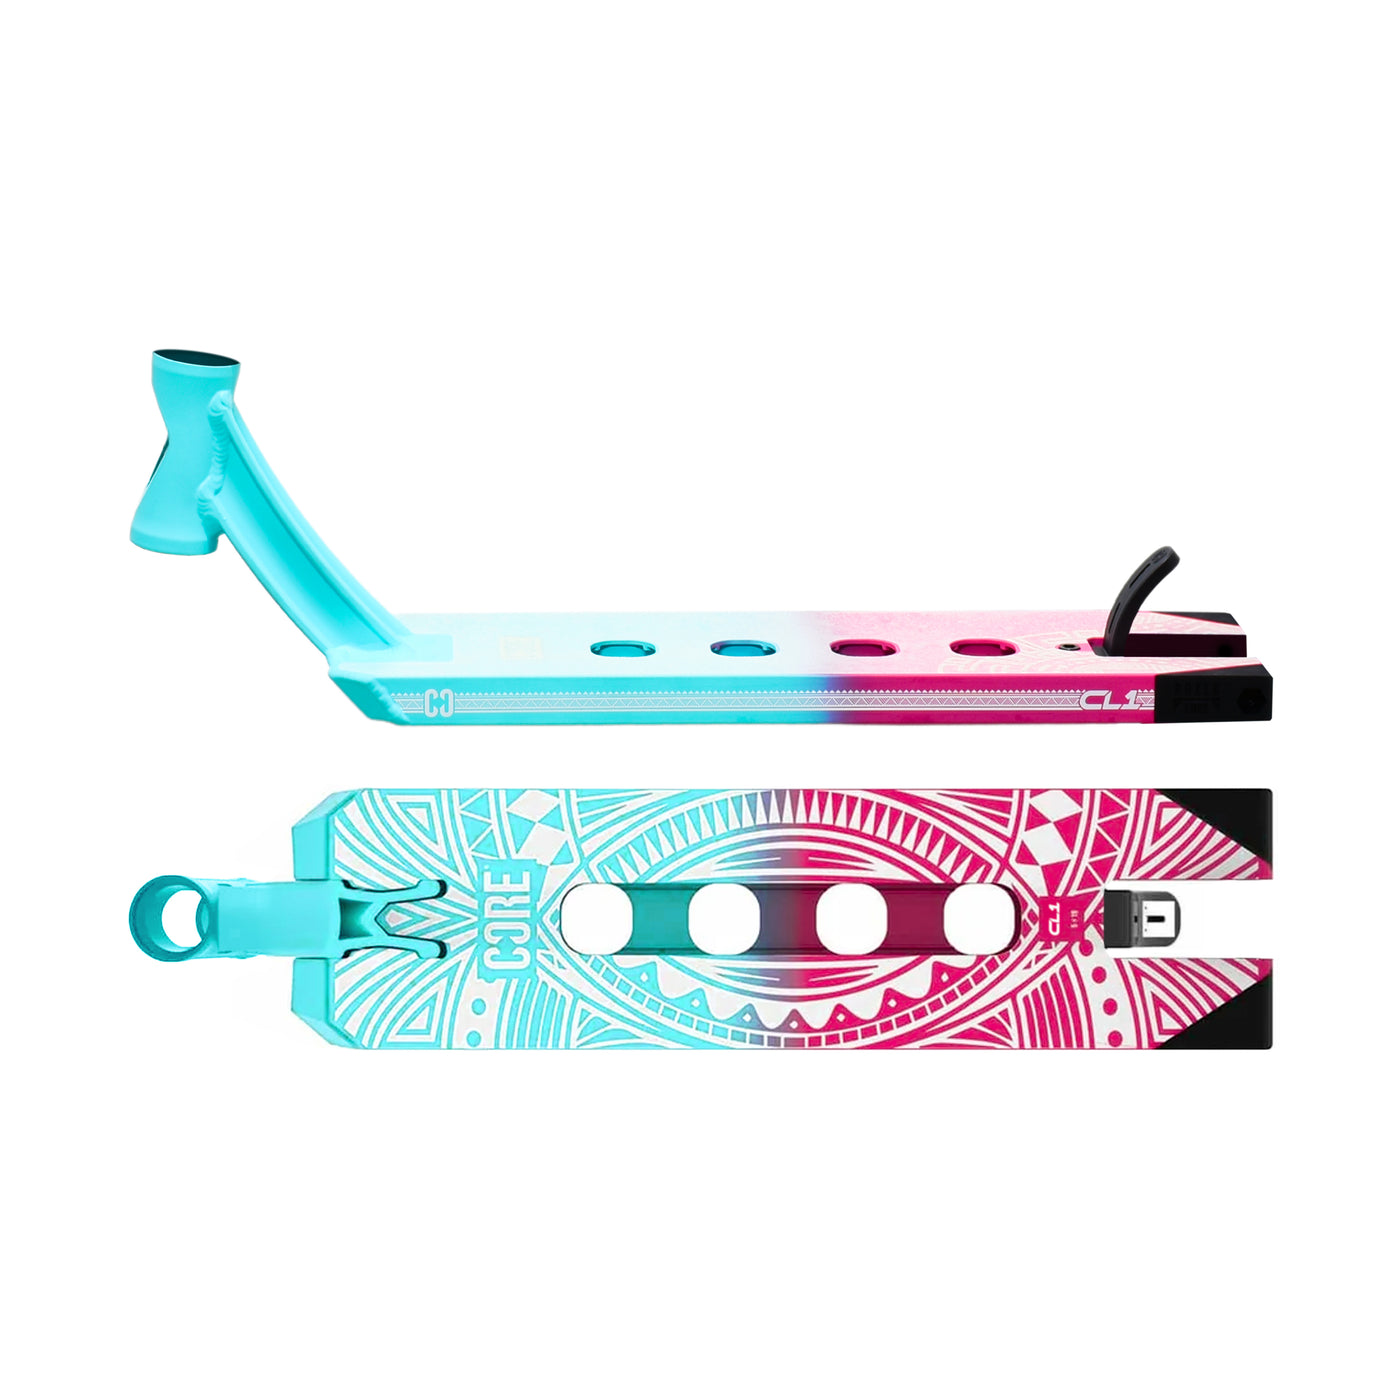 CORE CL1 Stunt Scooter Deck 5 x 19 - Pink/Teal